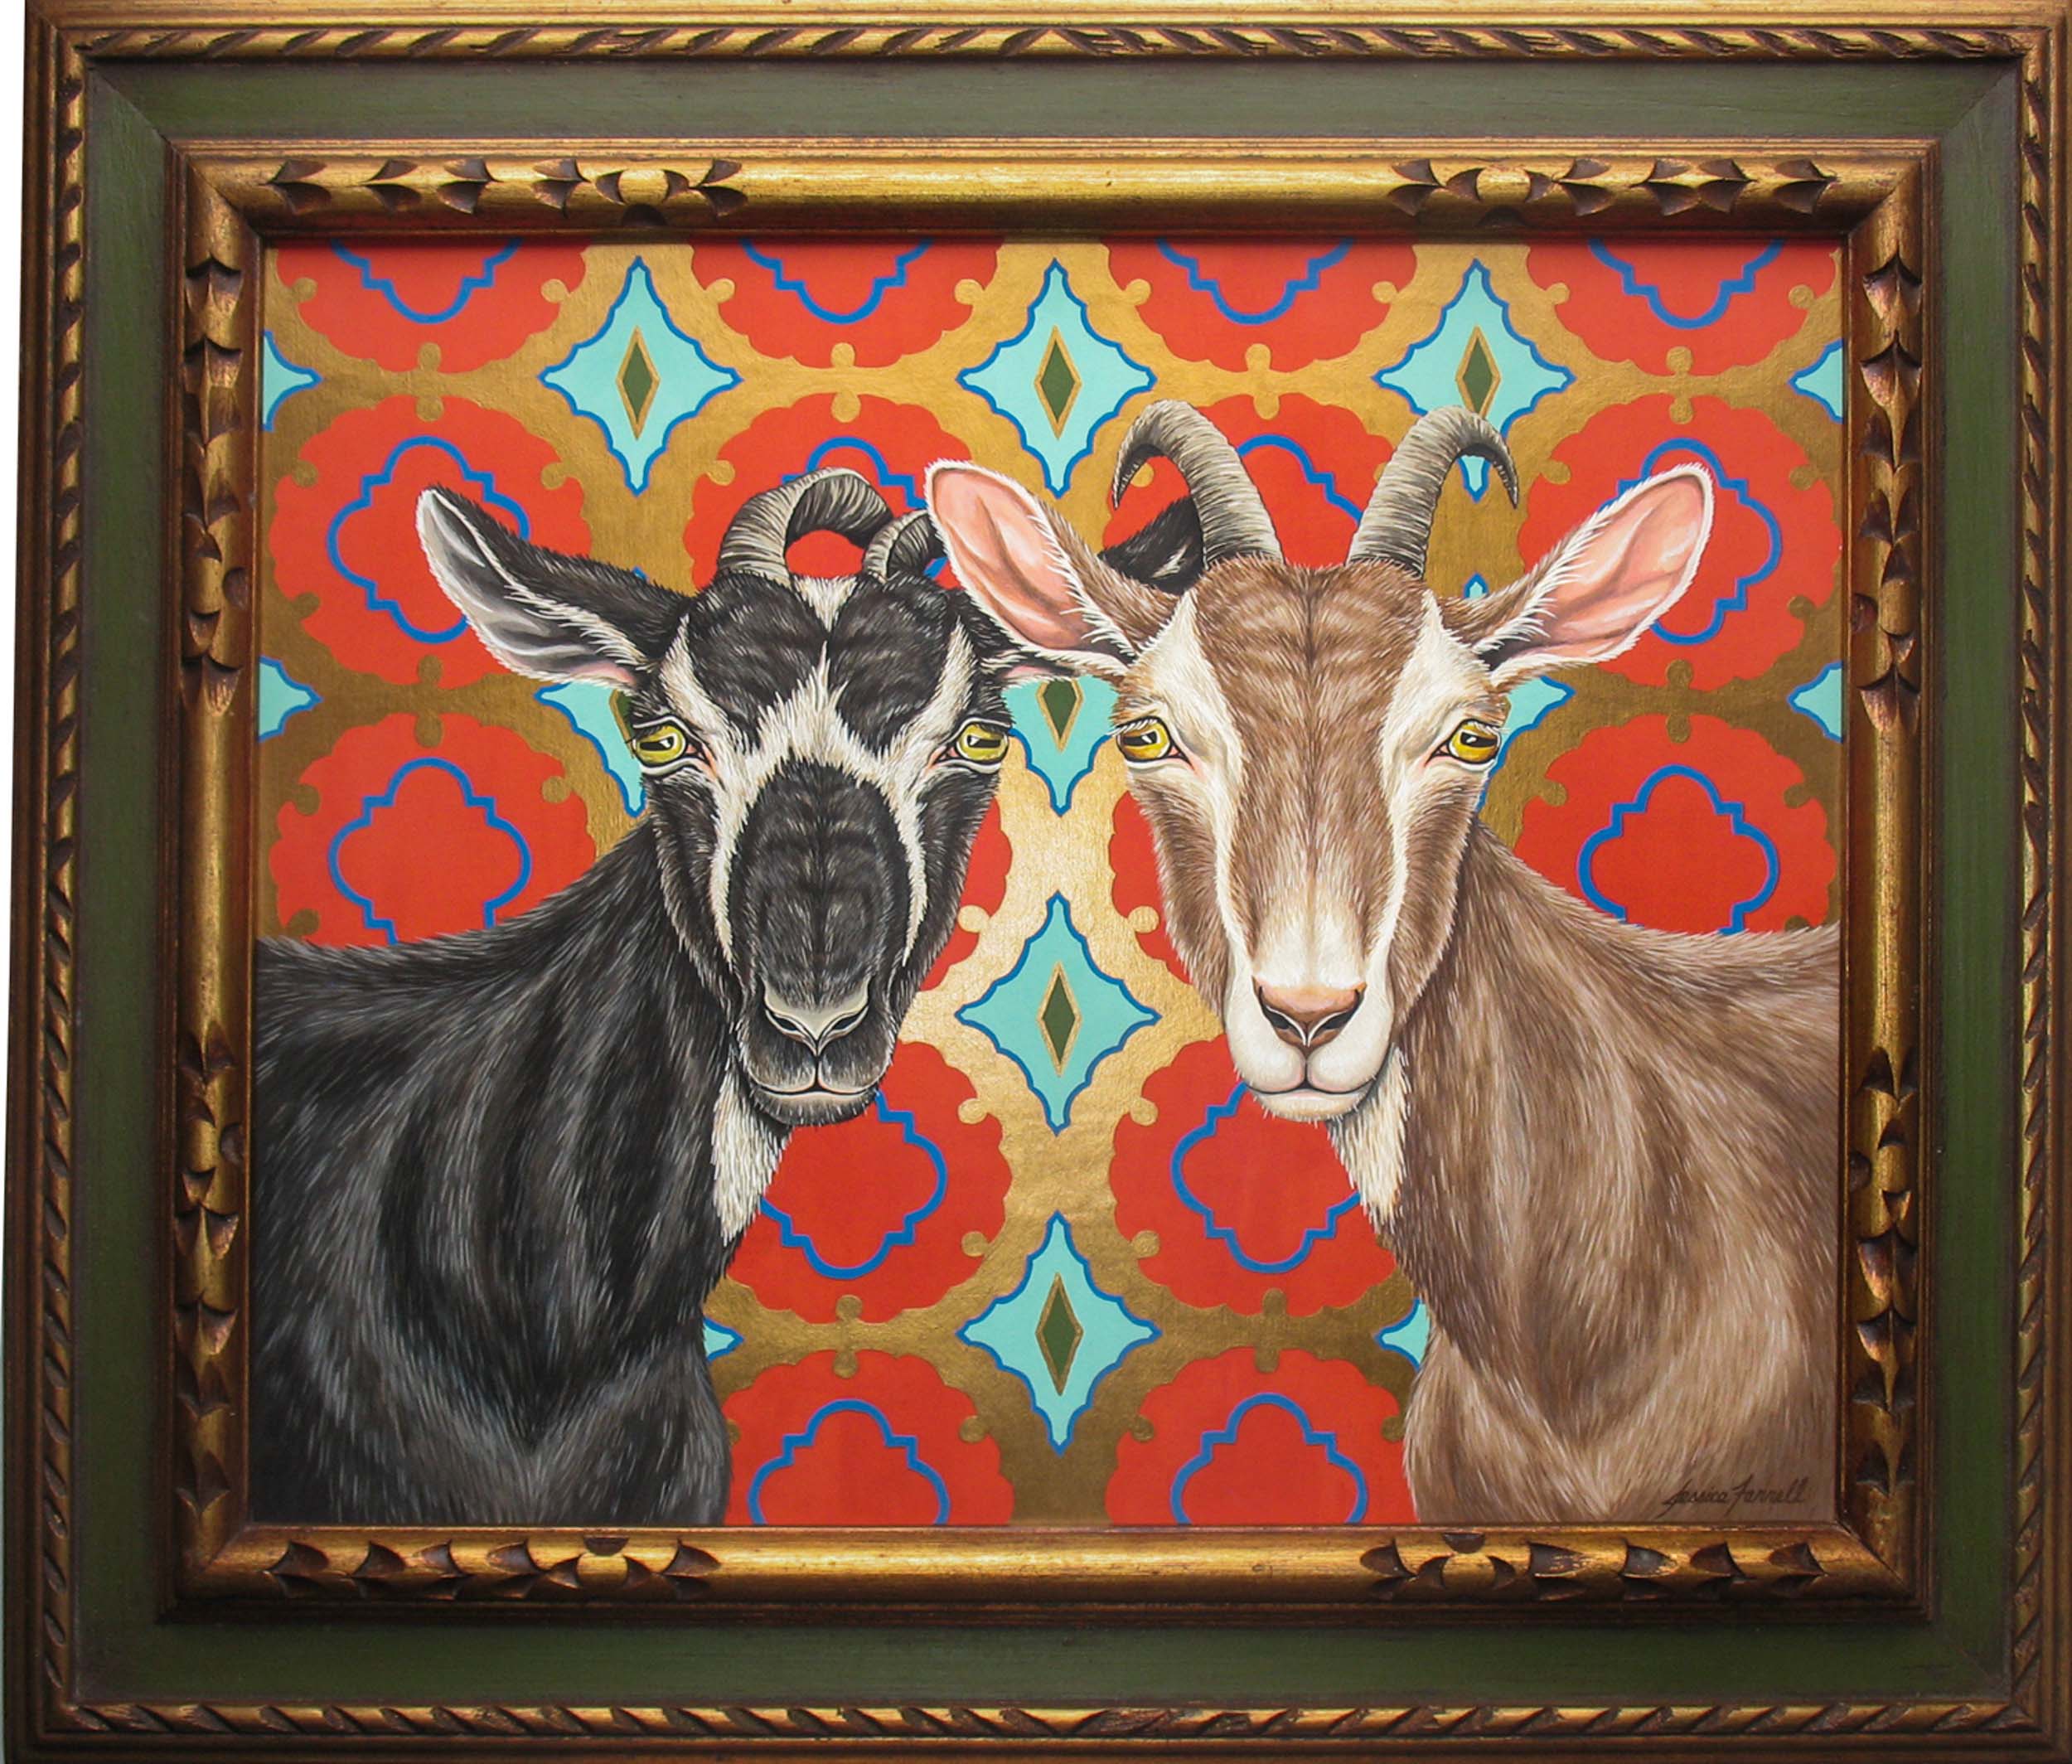   Billy &amp; Kid,  Acrylic on wood with vintage frame, 24 x 28 inches (framed)  (private collection) 